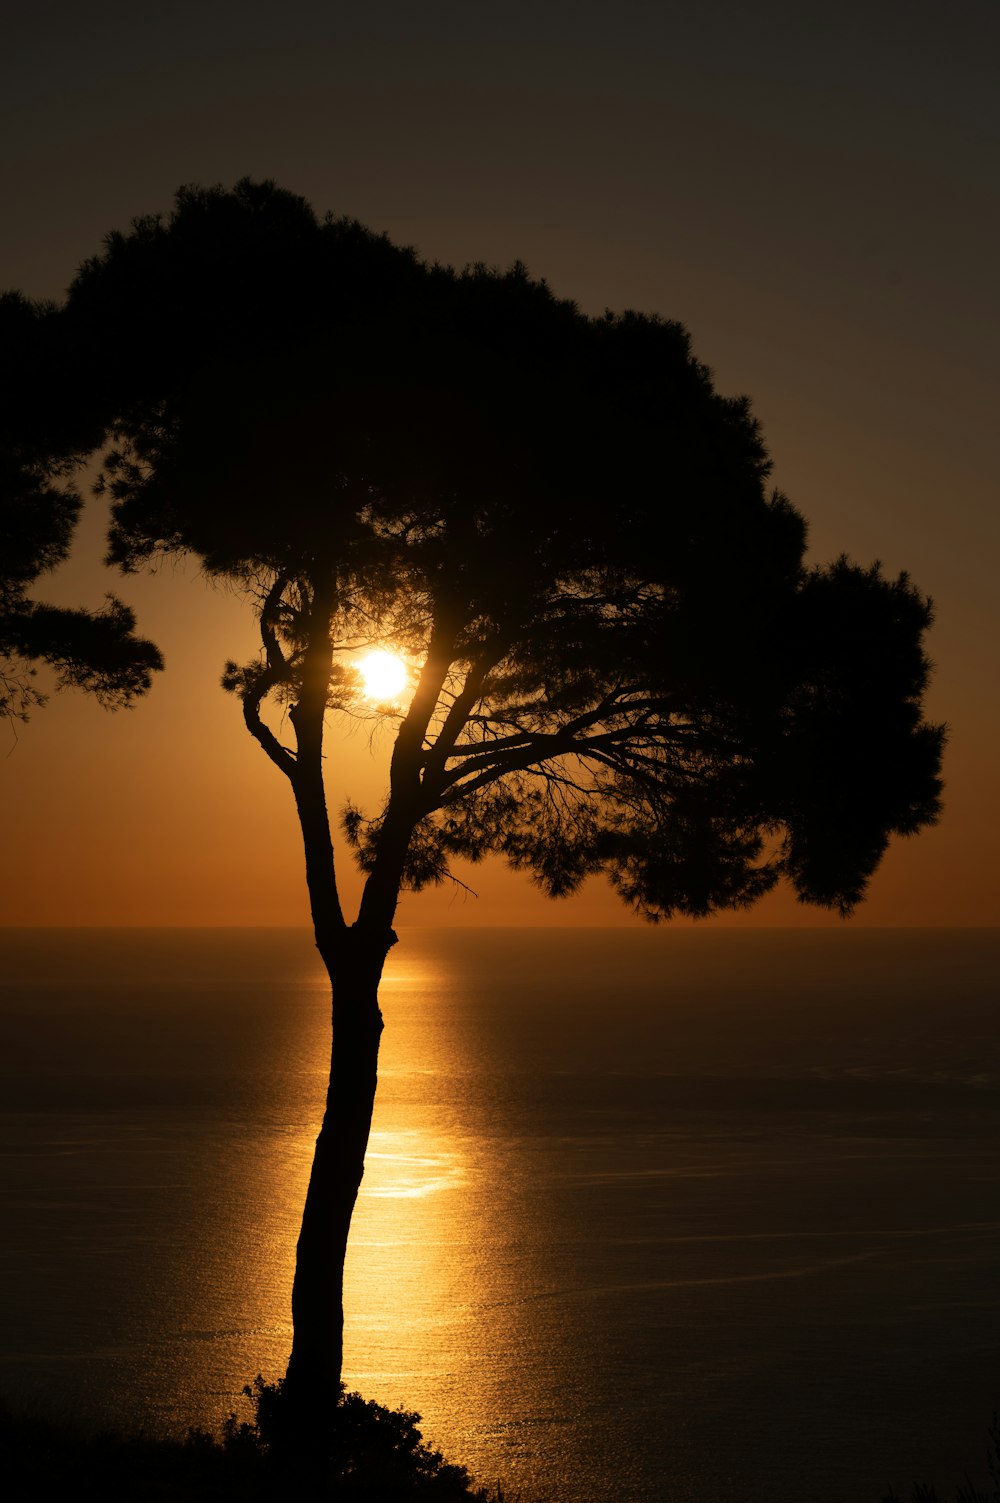 the sun is setting behind a tree by the water